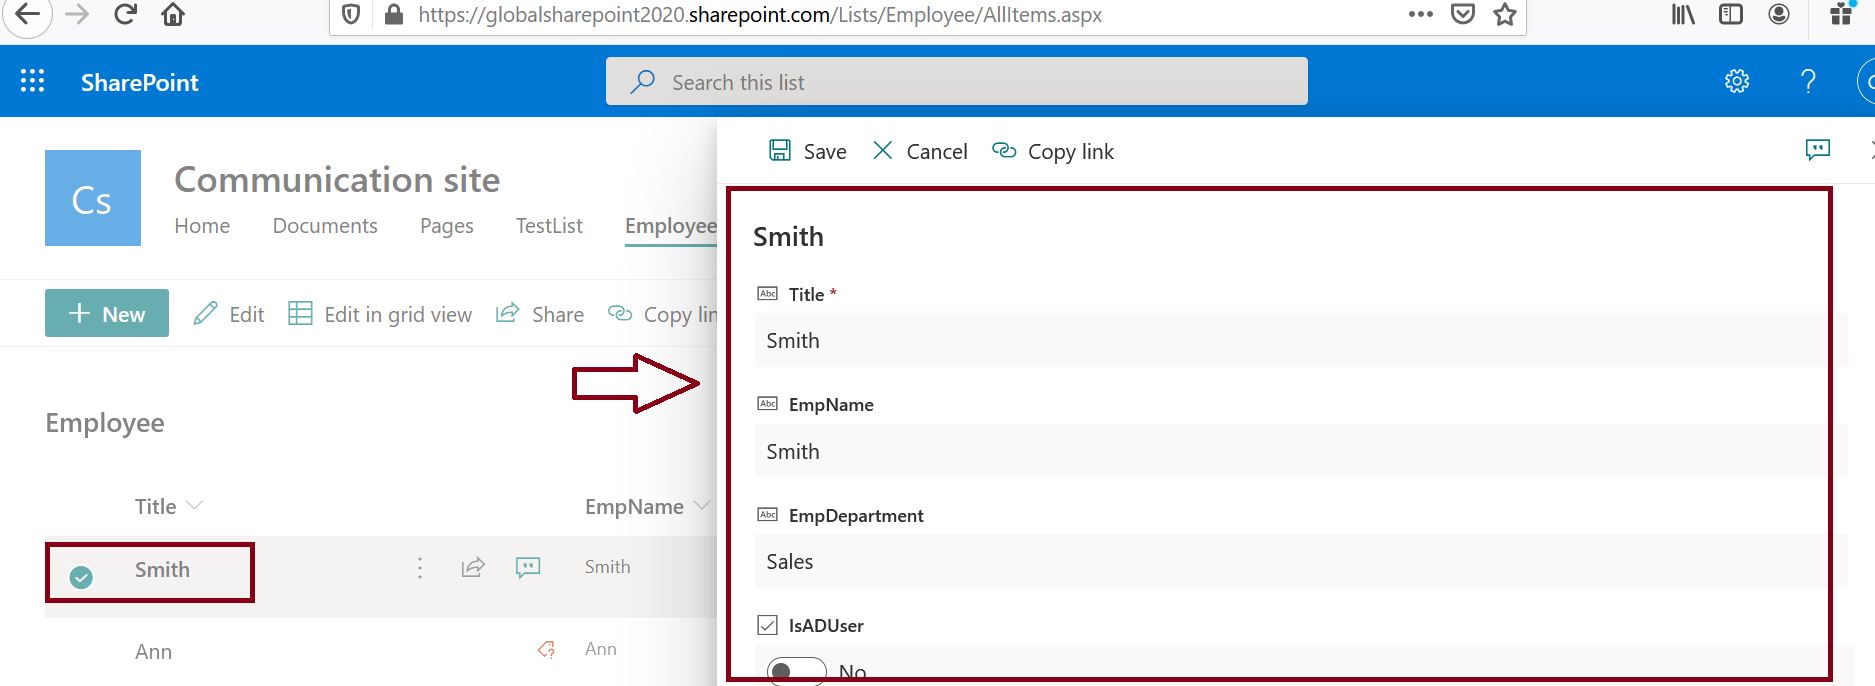 Customize the list form using JSON in SharePoint Online, Open modern SharePoint Online list edit Form